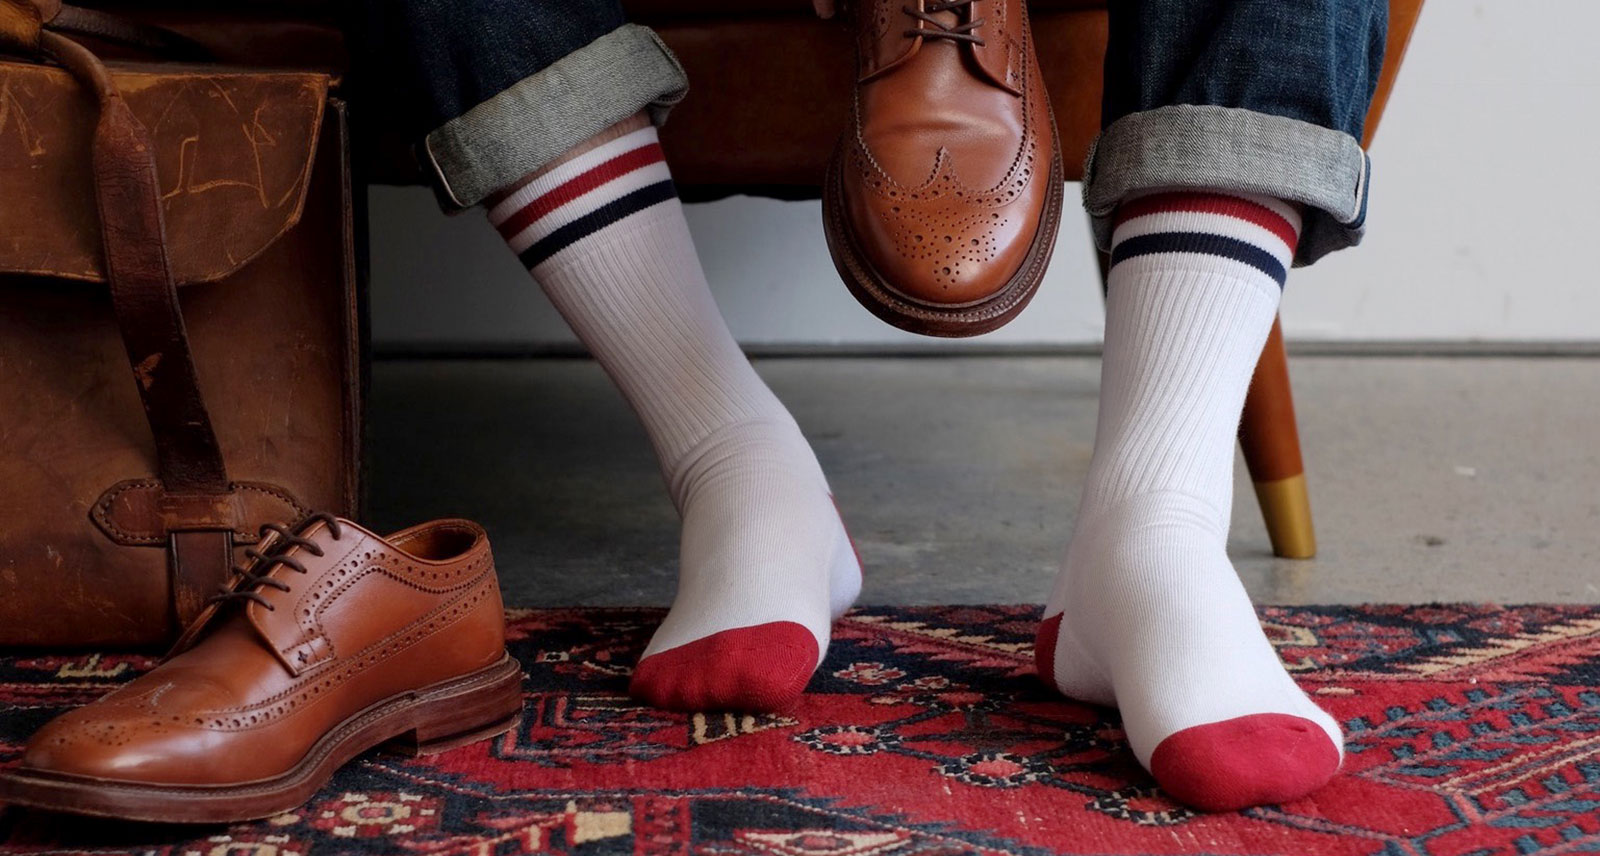 Ask Not What These JFK-Inspired Socks Can Do For You